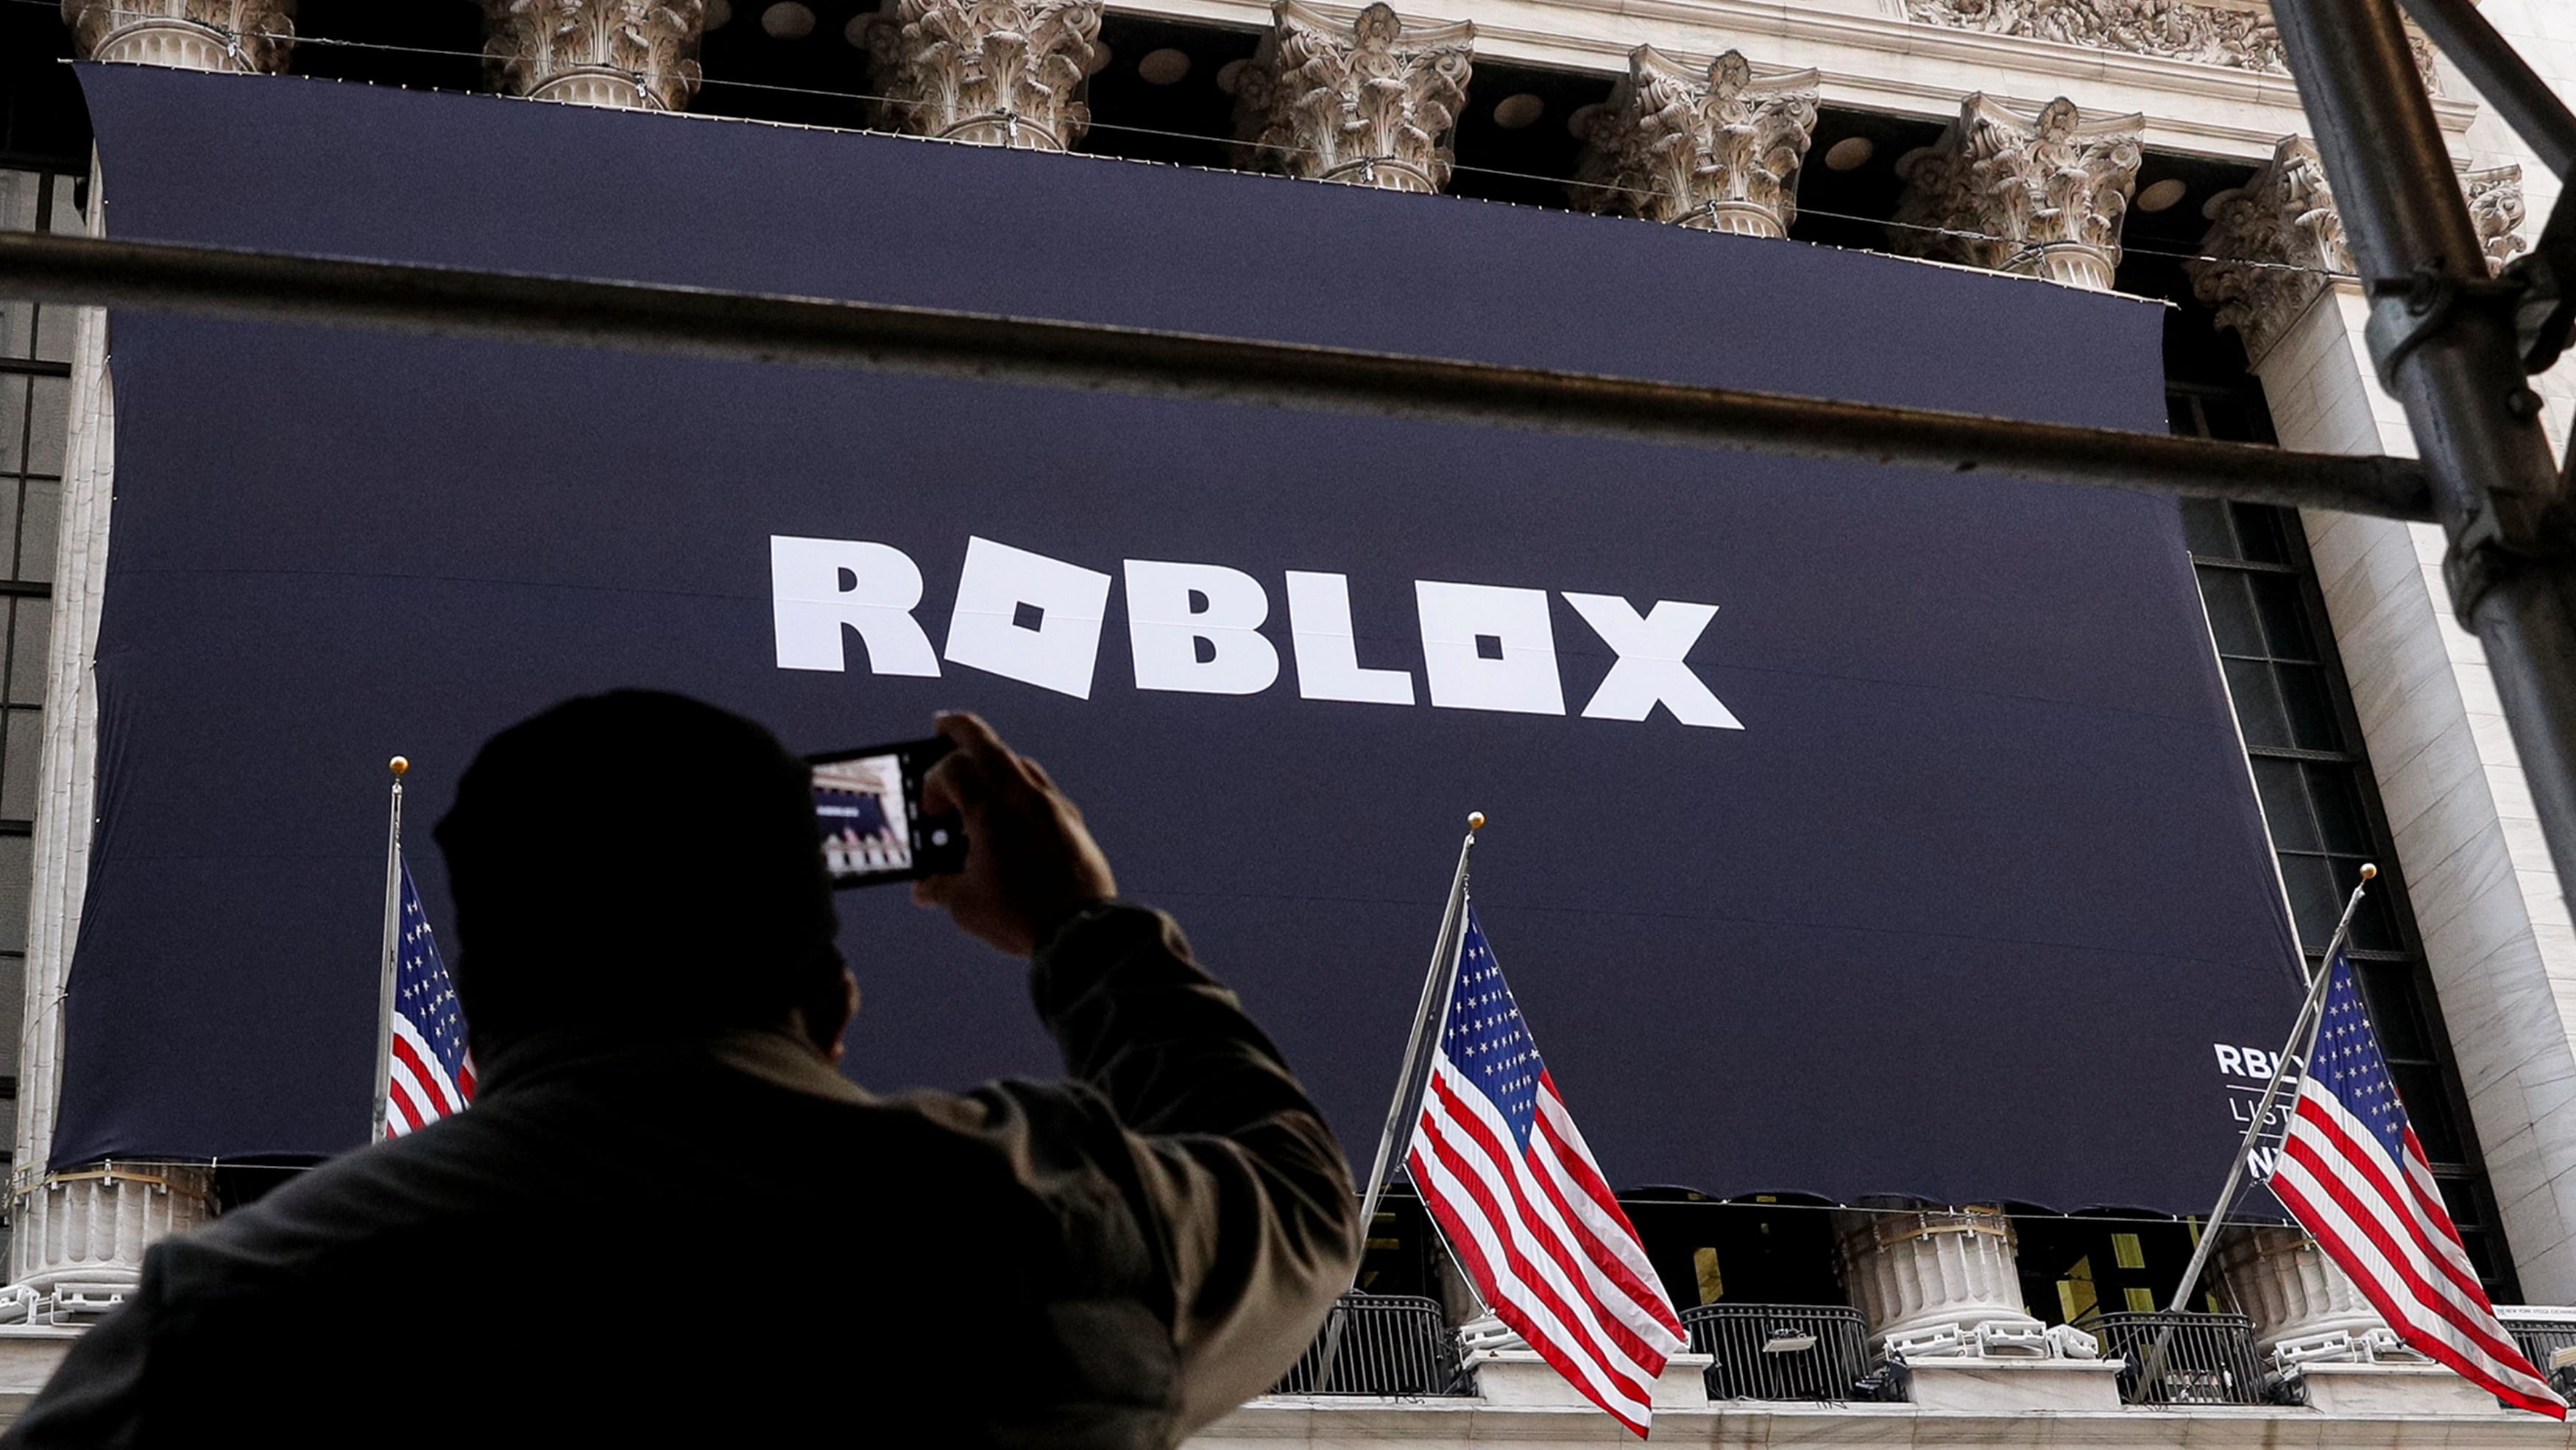 Roblox Jumps As Virtual Currency Trumps Actual Sales - roblox question mark mask